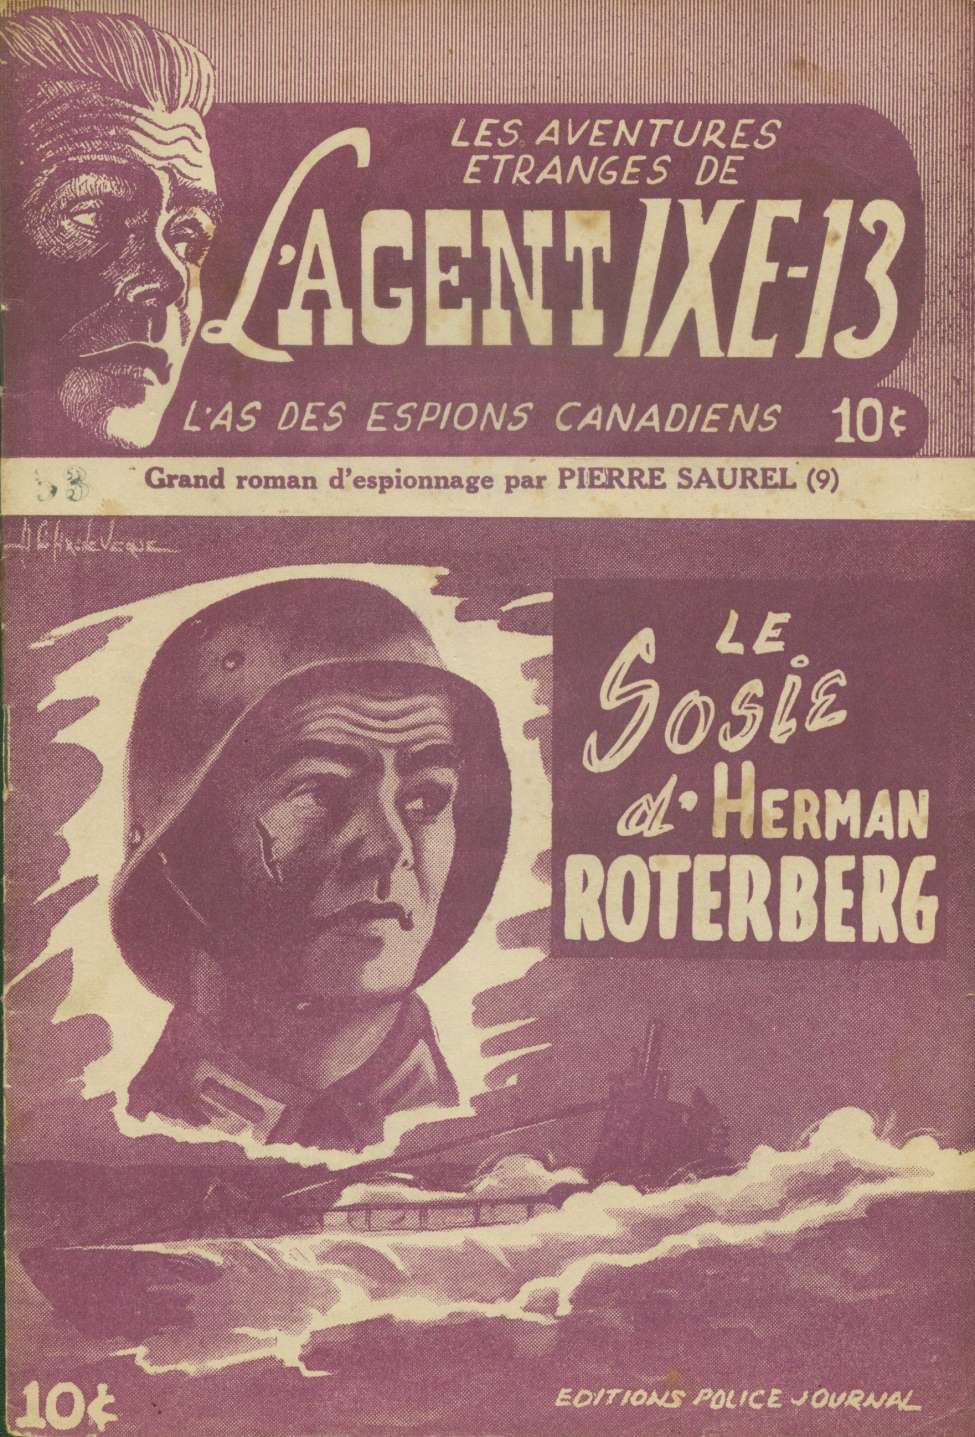 Book Cover For L'Agent IXE-13 v2 9 – Le sosie d’Herman Roterberg